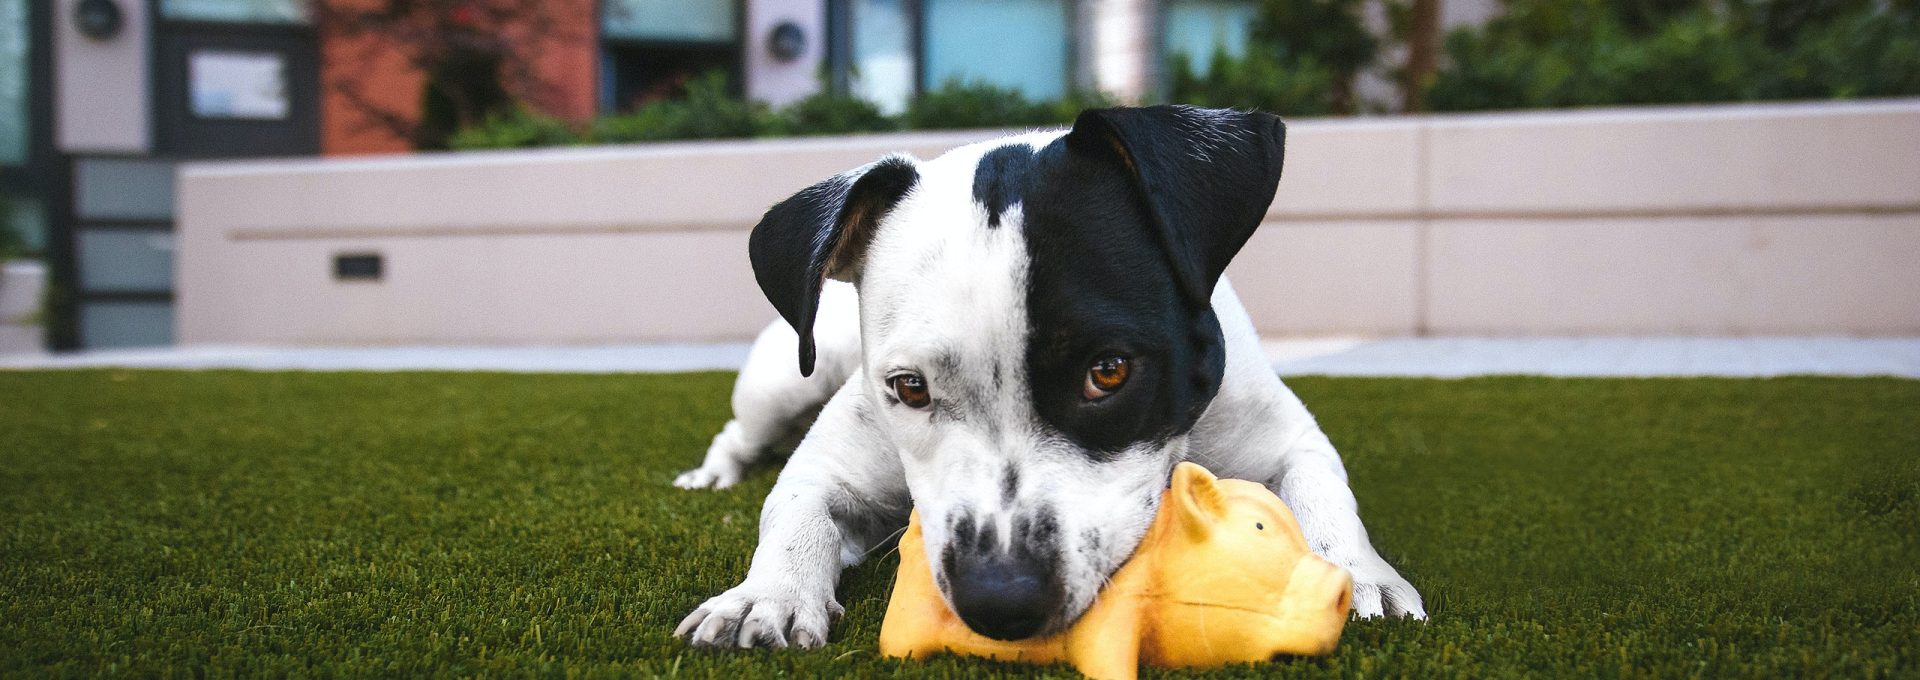 white and black American pitbull terrier bit a yellow pig toy lying on grass outdoor during daytime